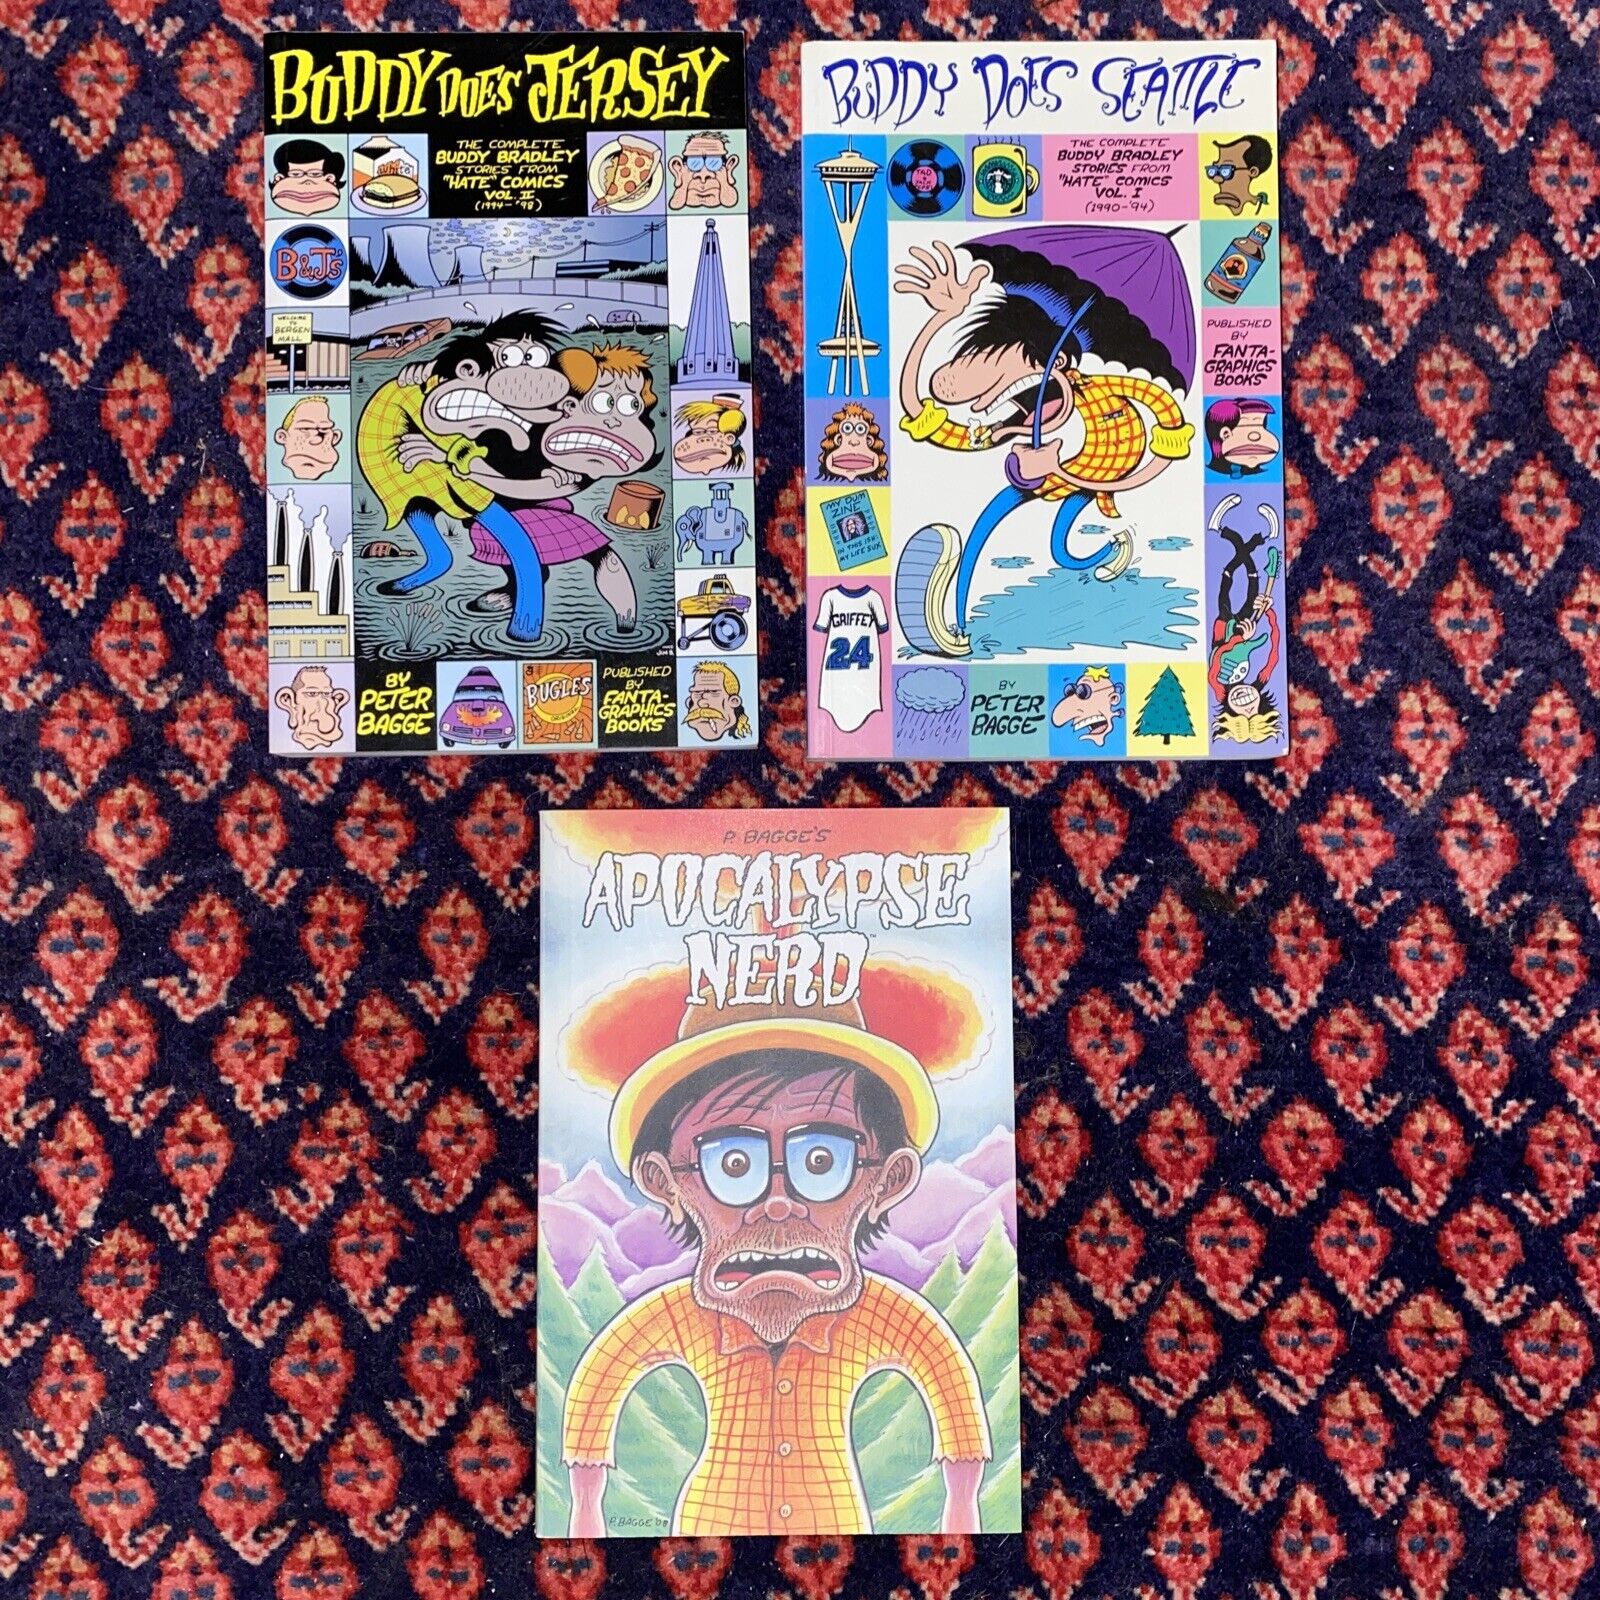 3 Peter Bagge Graphic Novel lot Buddy Does Seattle Jersey Apocalypse Nerd Hate